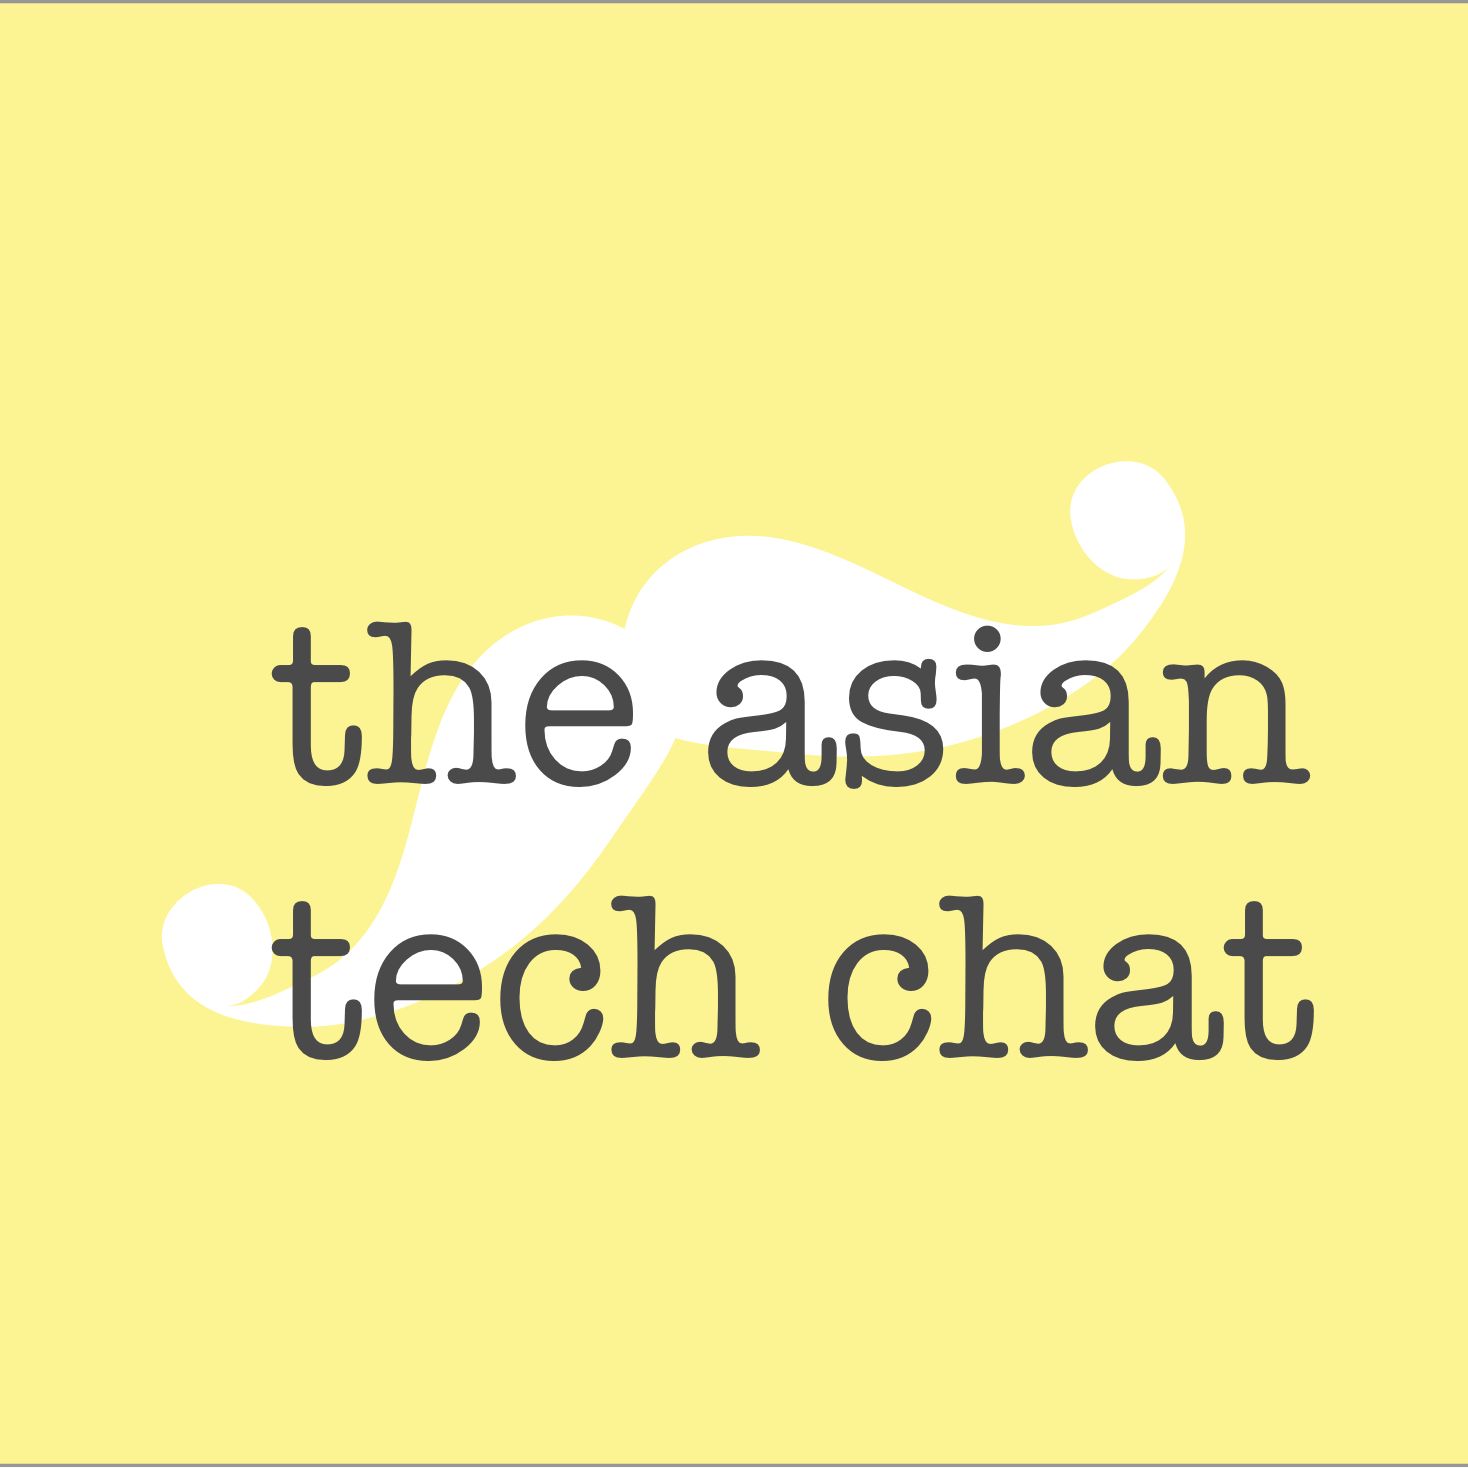 Asian chat